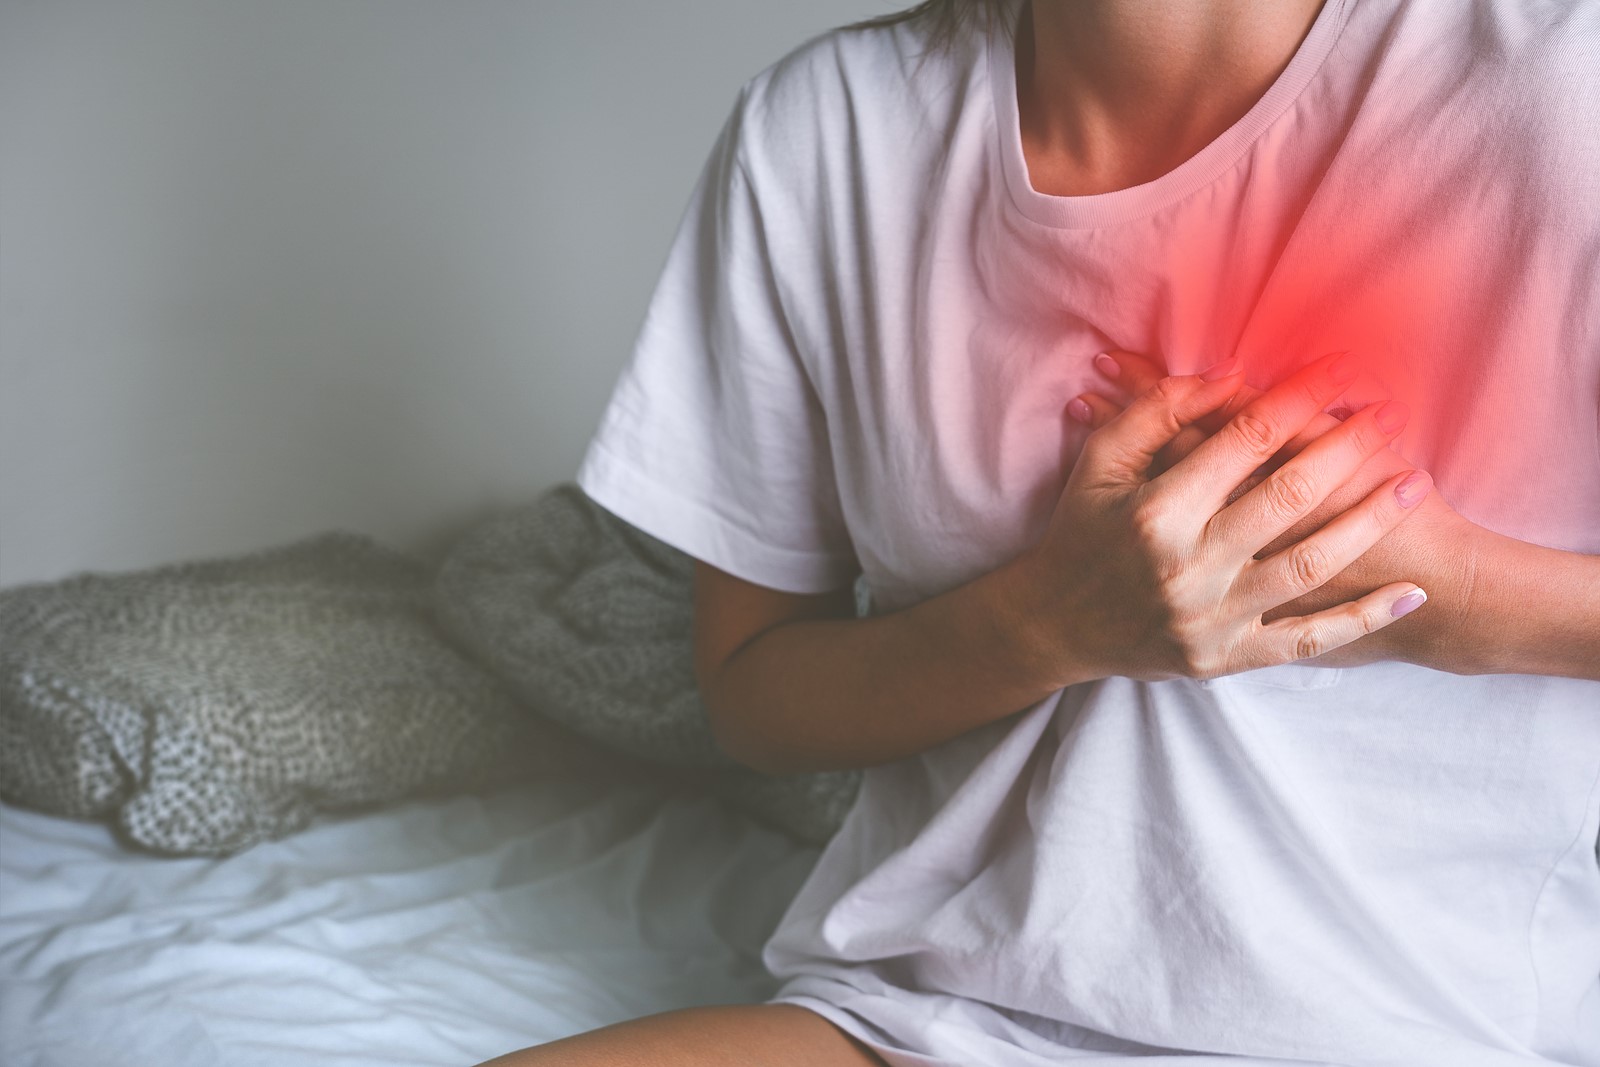 When Is Chest Pain an Emergency?